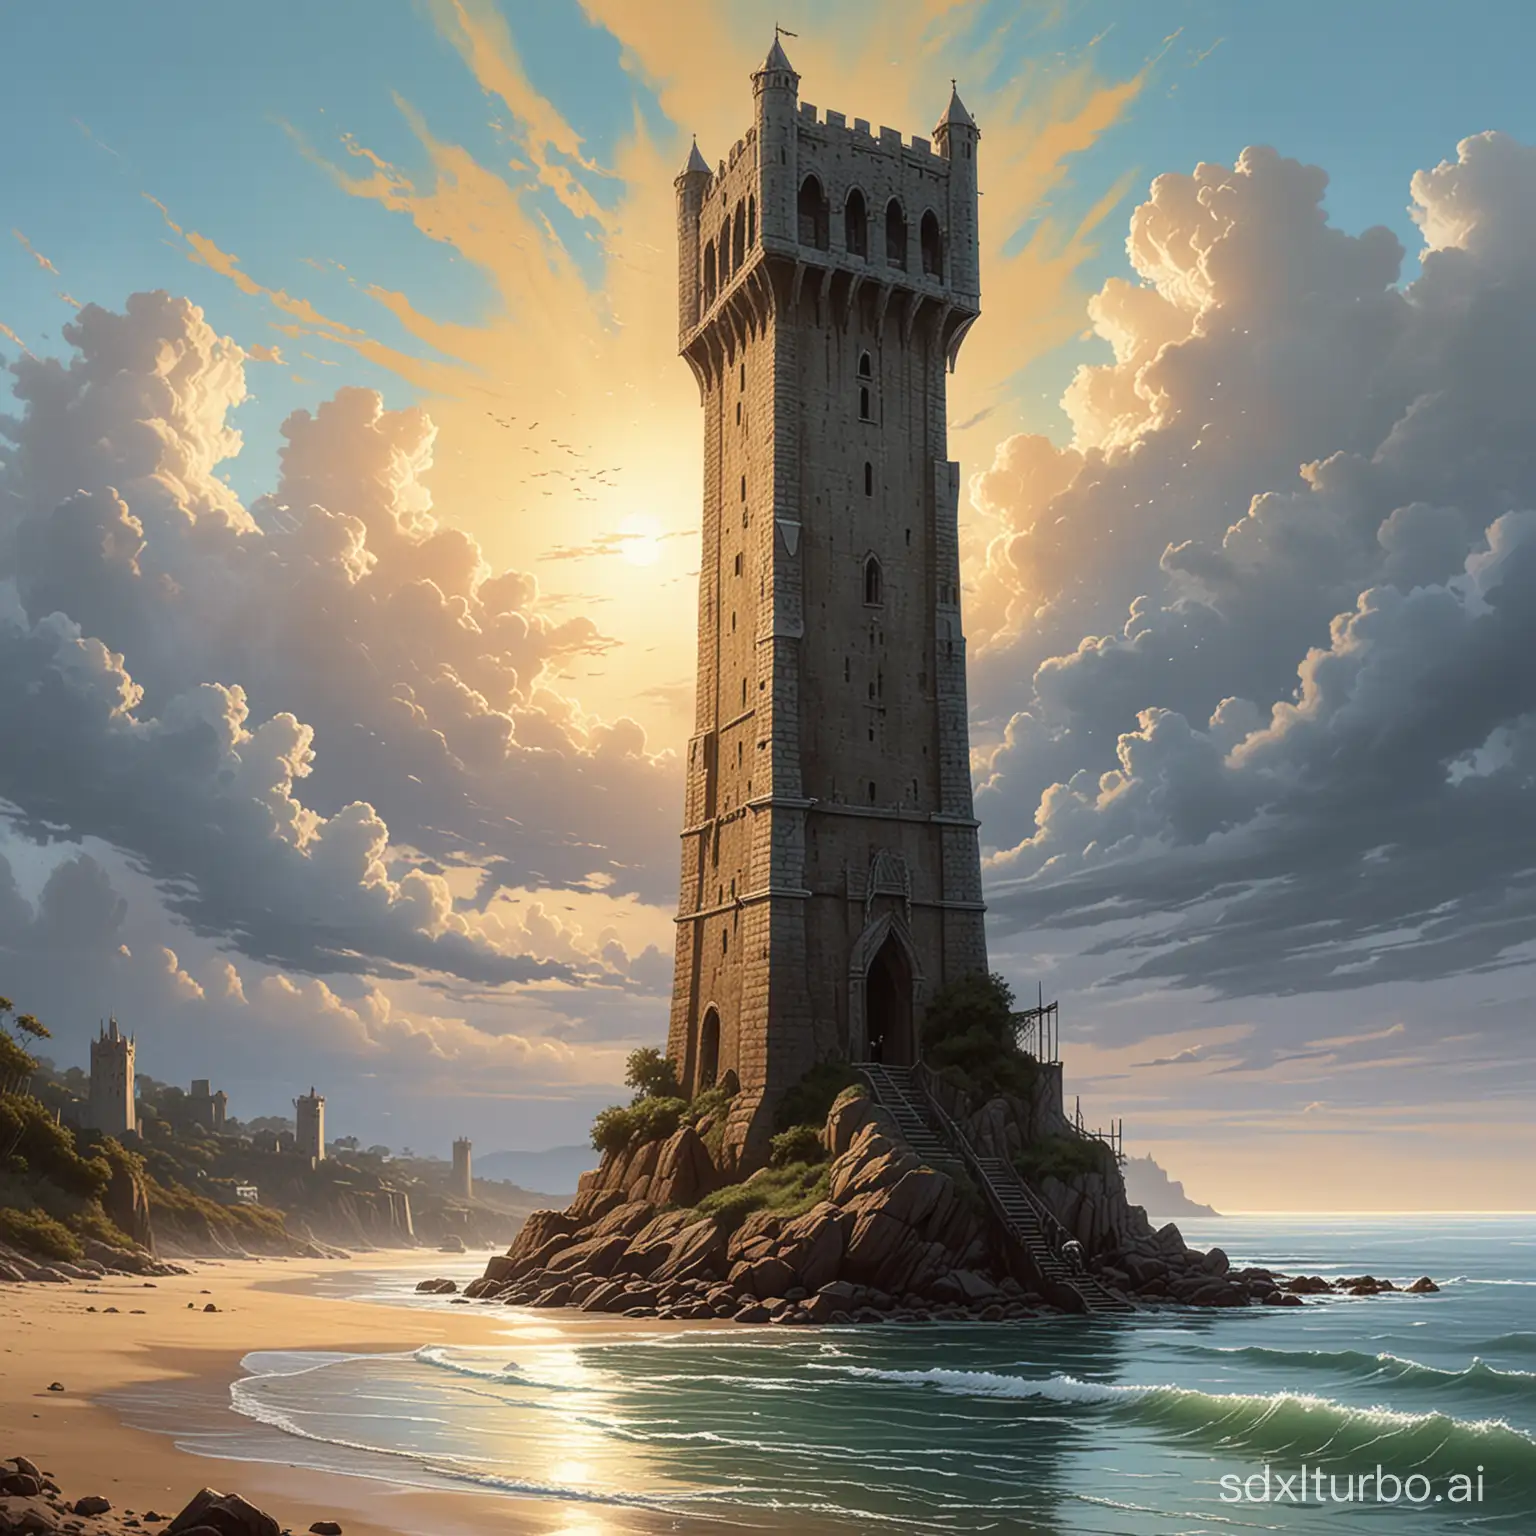 Medieval-Metallic-Tower-by-the-Sea-Inspired-by-Michael-Whelan